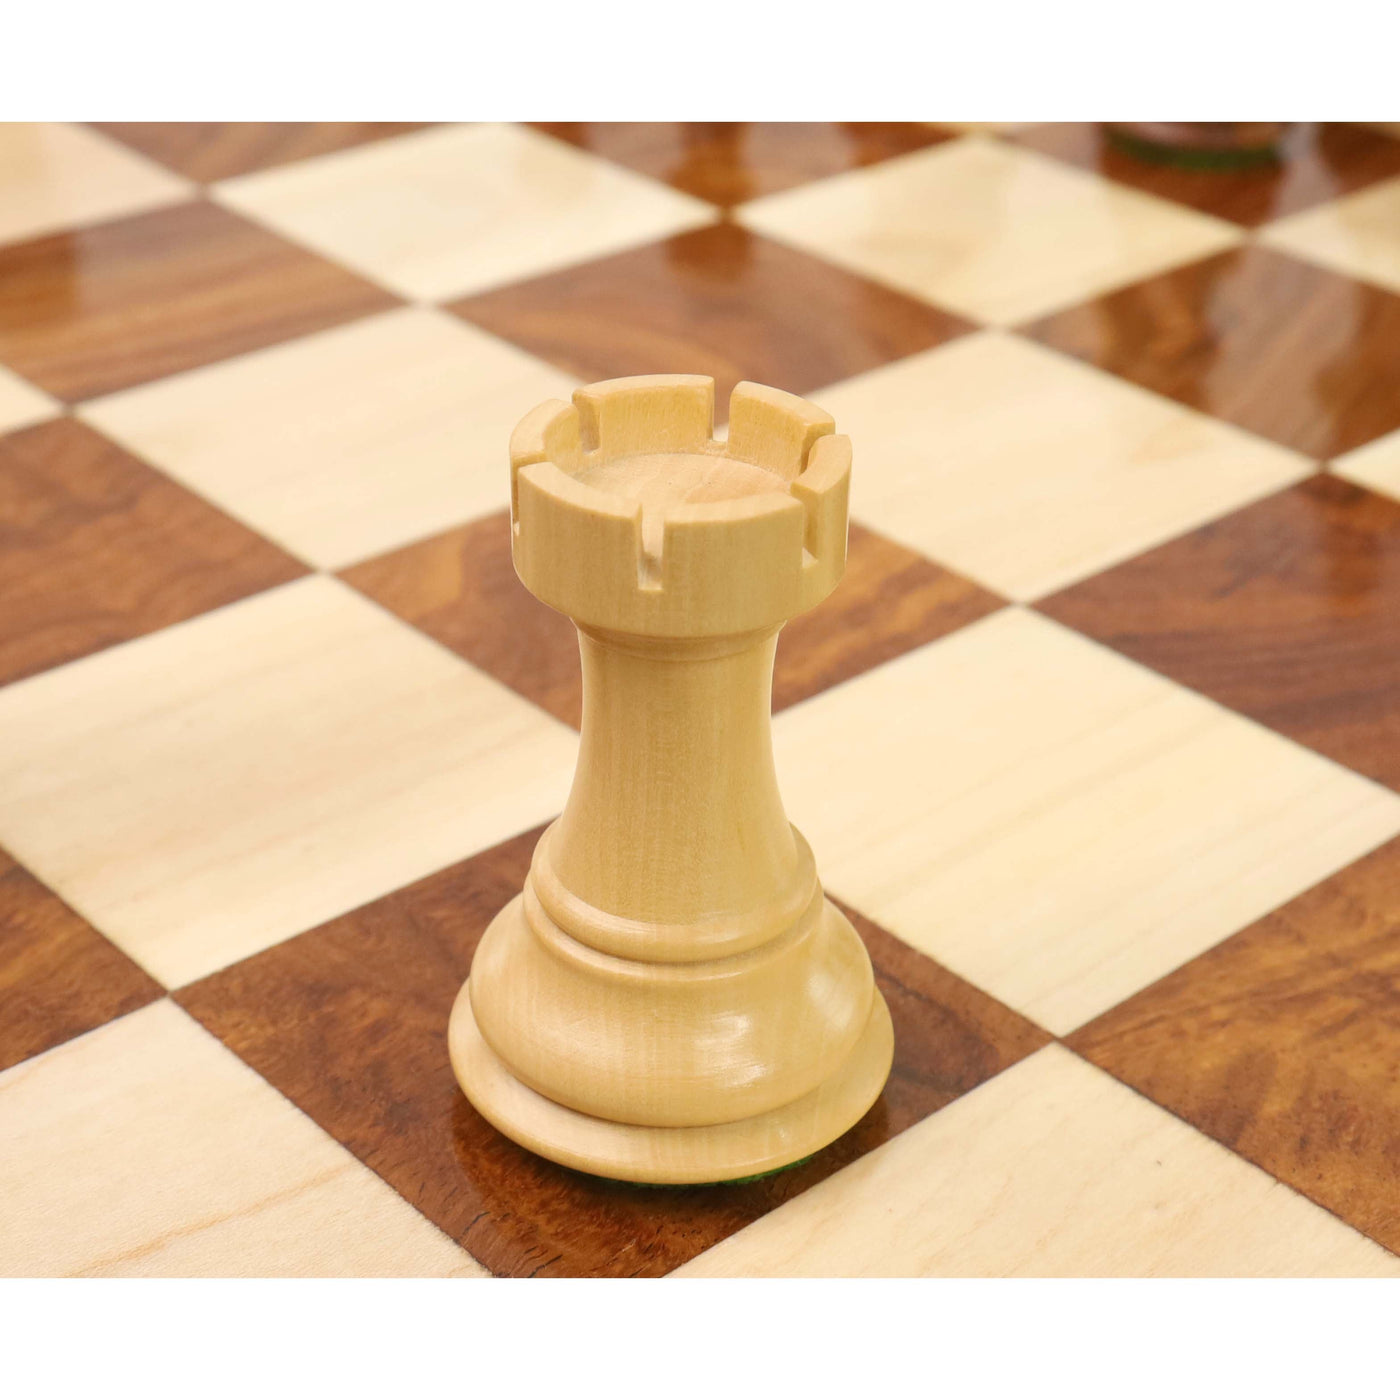 3.7" British Staunton Weighted Chess Set - Chess Pieces Only-  Golden Rosewood & Boxwood